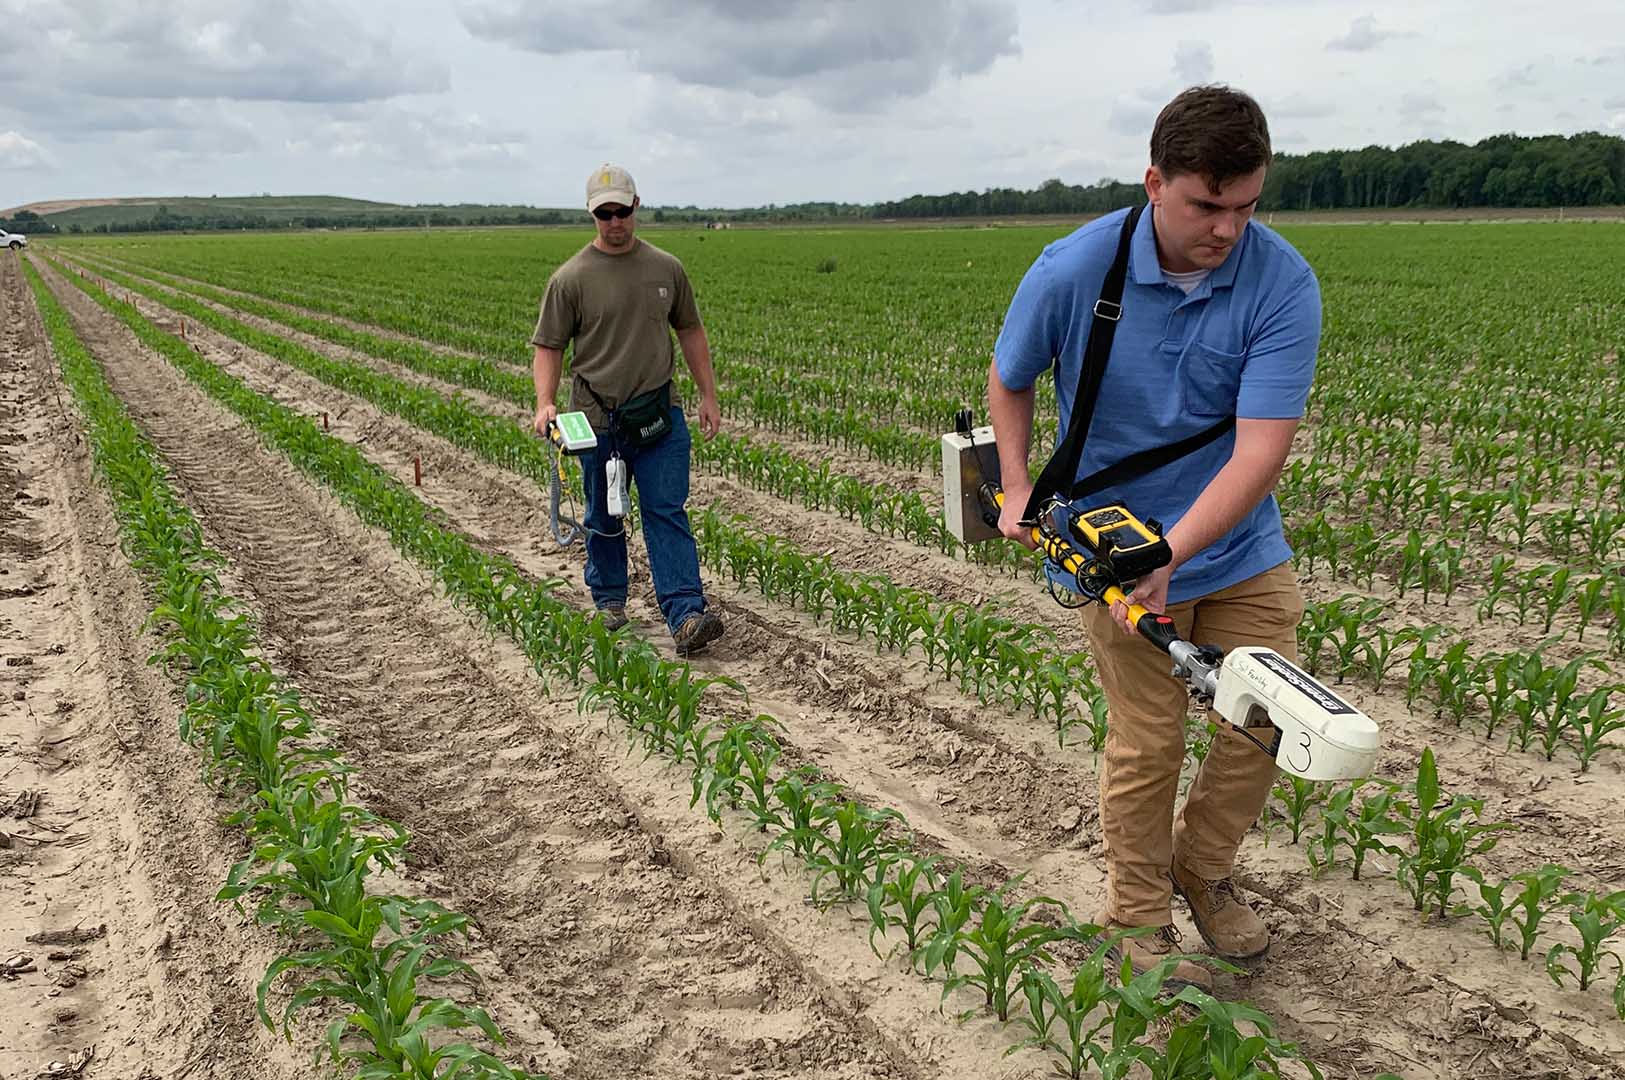 Former graduate student Joey Williams (left) uses a crop circle sensor while Camden Oglesby, graduate student, uses a green seeker sensor. The sensors are collecting corn reflectance data. (Photo submitted)